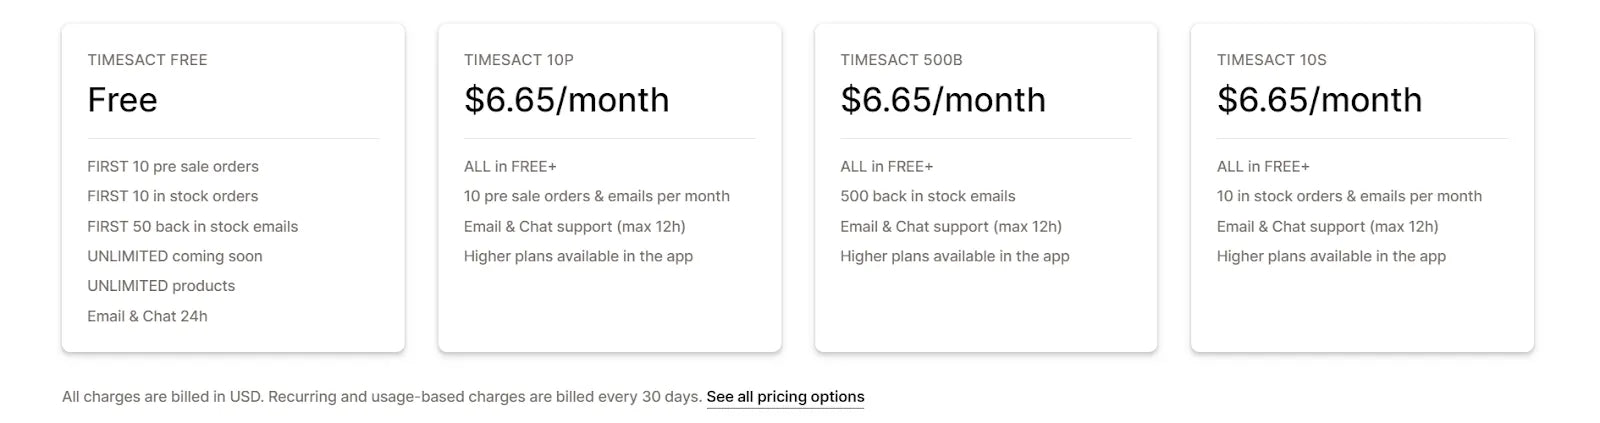 Timesact app’s pricing plans